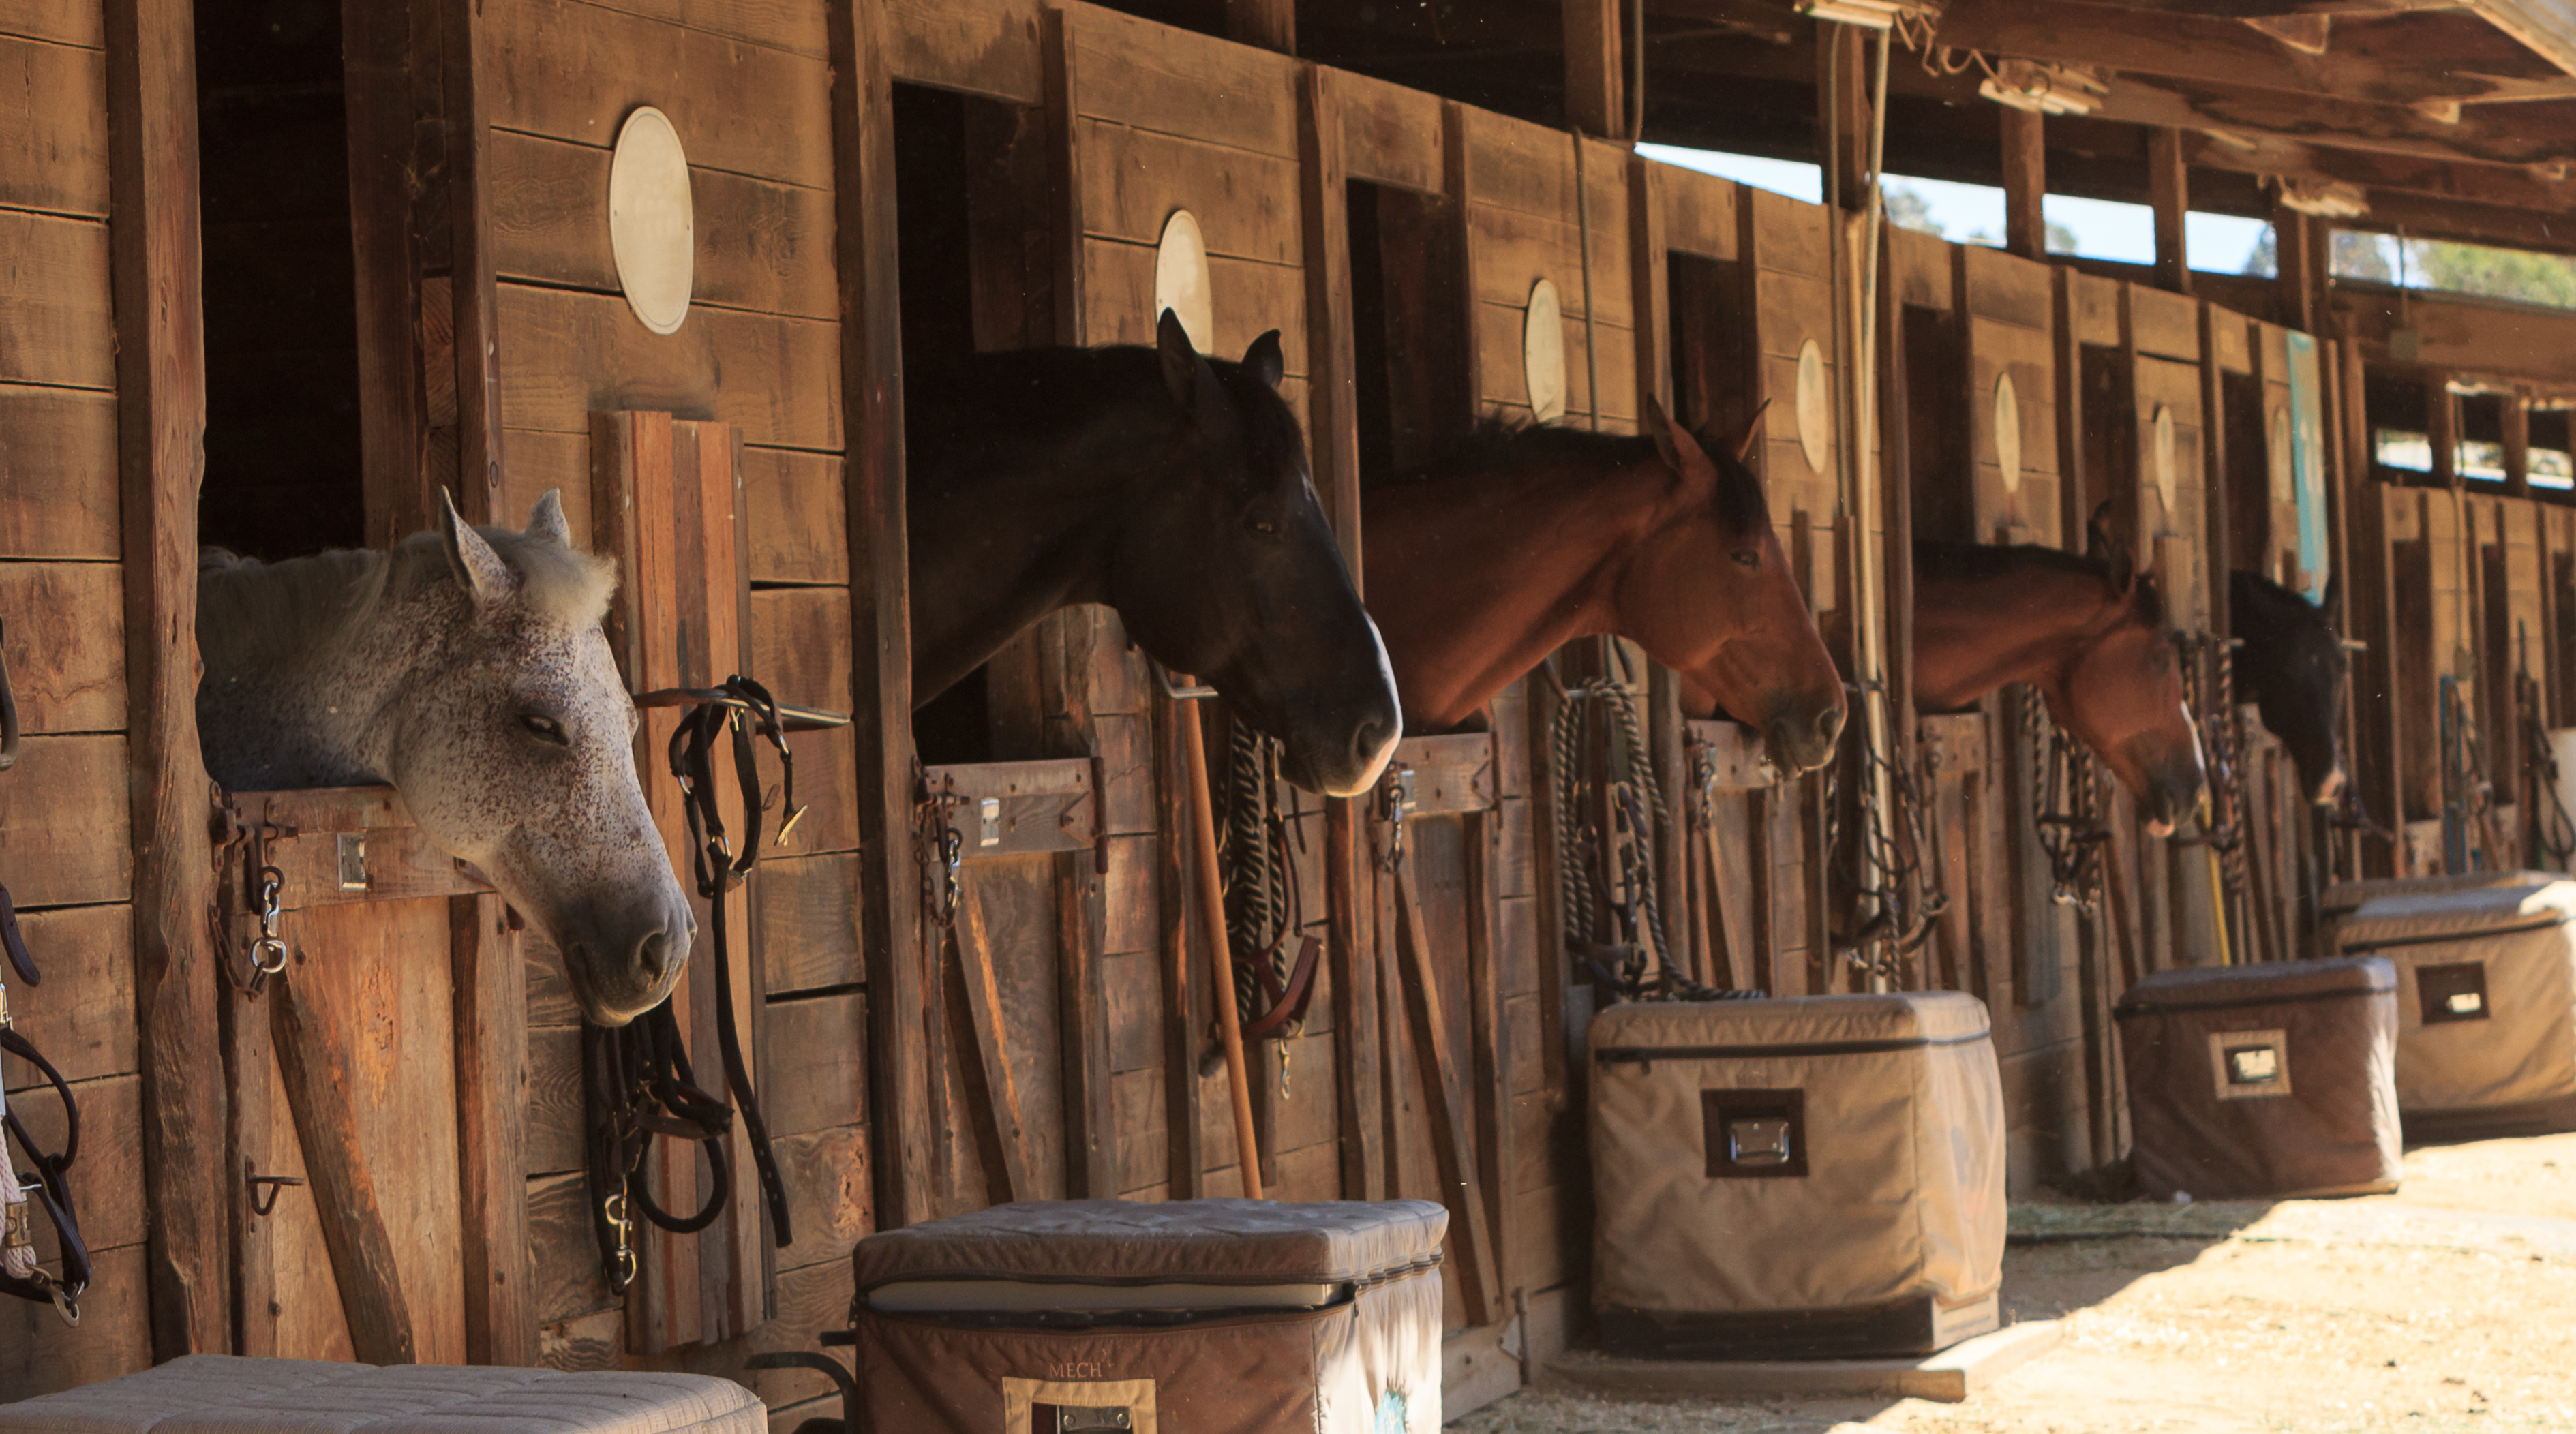 Rethinking how we keep horses in stalls